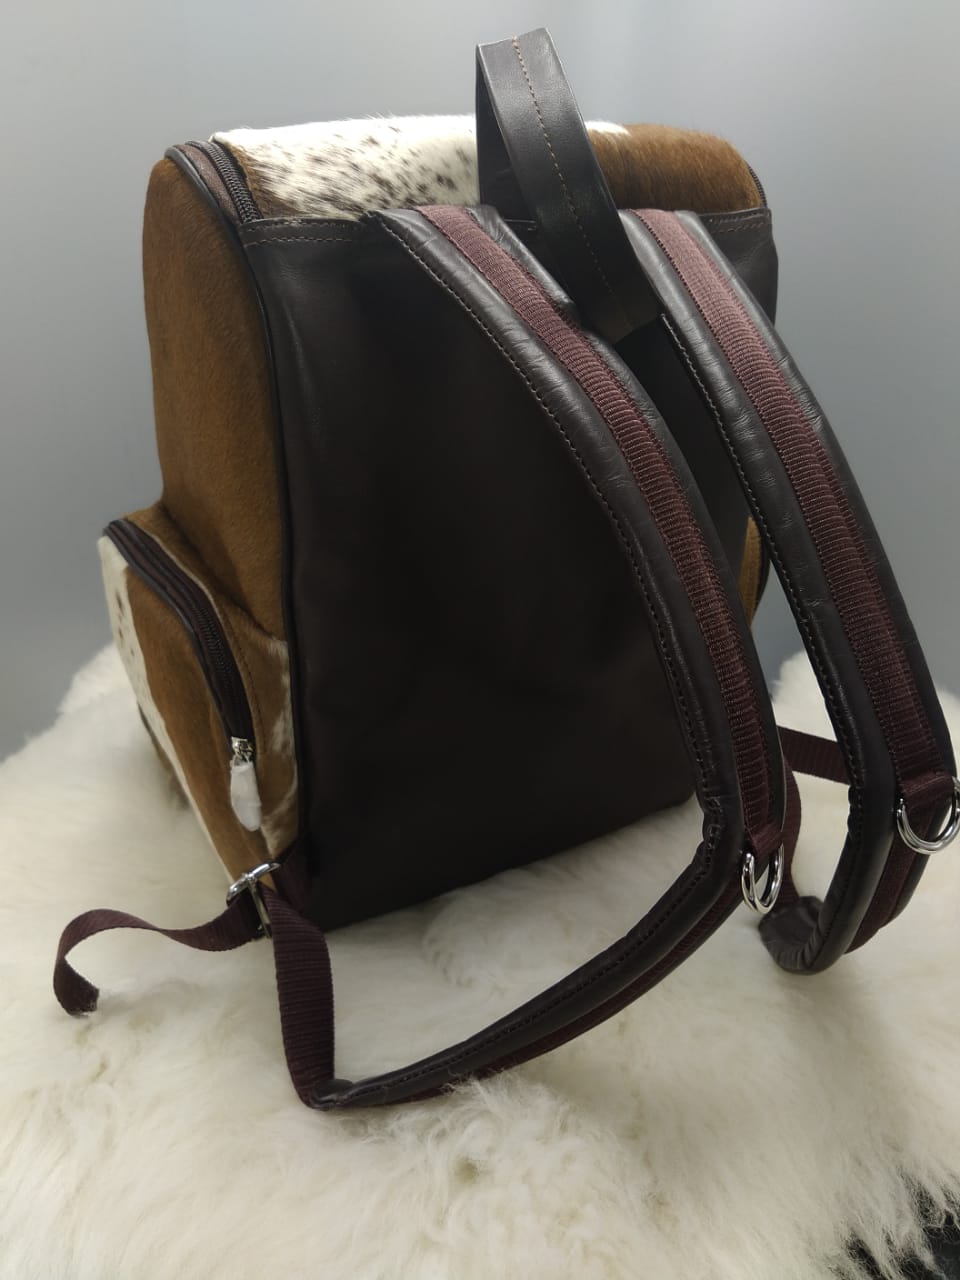  Love this custom made wild pony hair handbag, Look forward to having more like this one. Fast delivery and nice personal touch with western touch